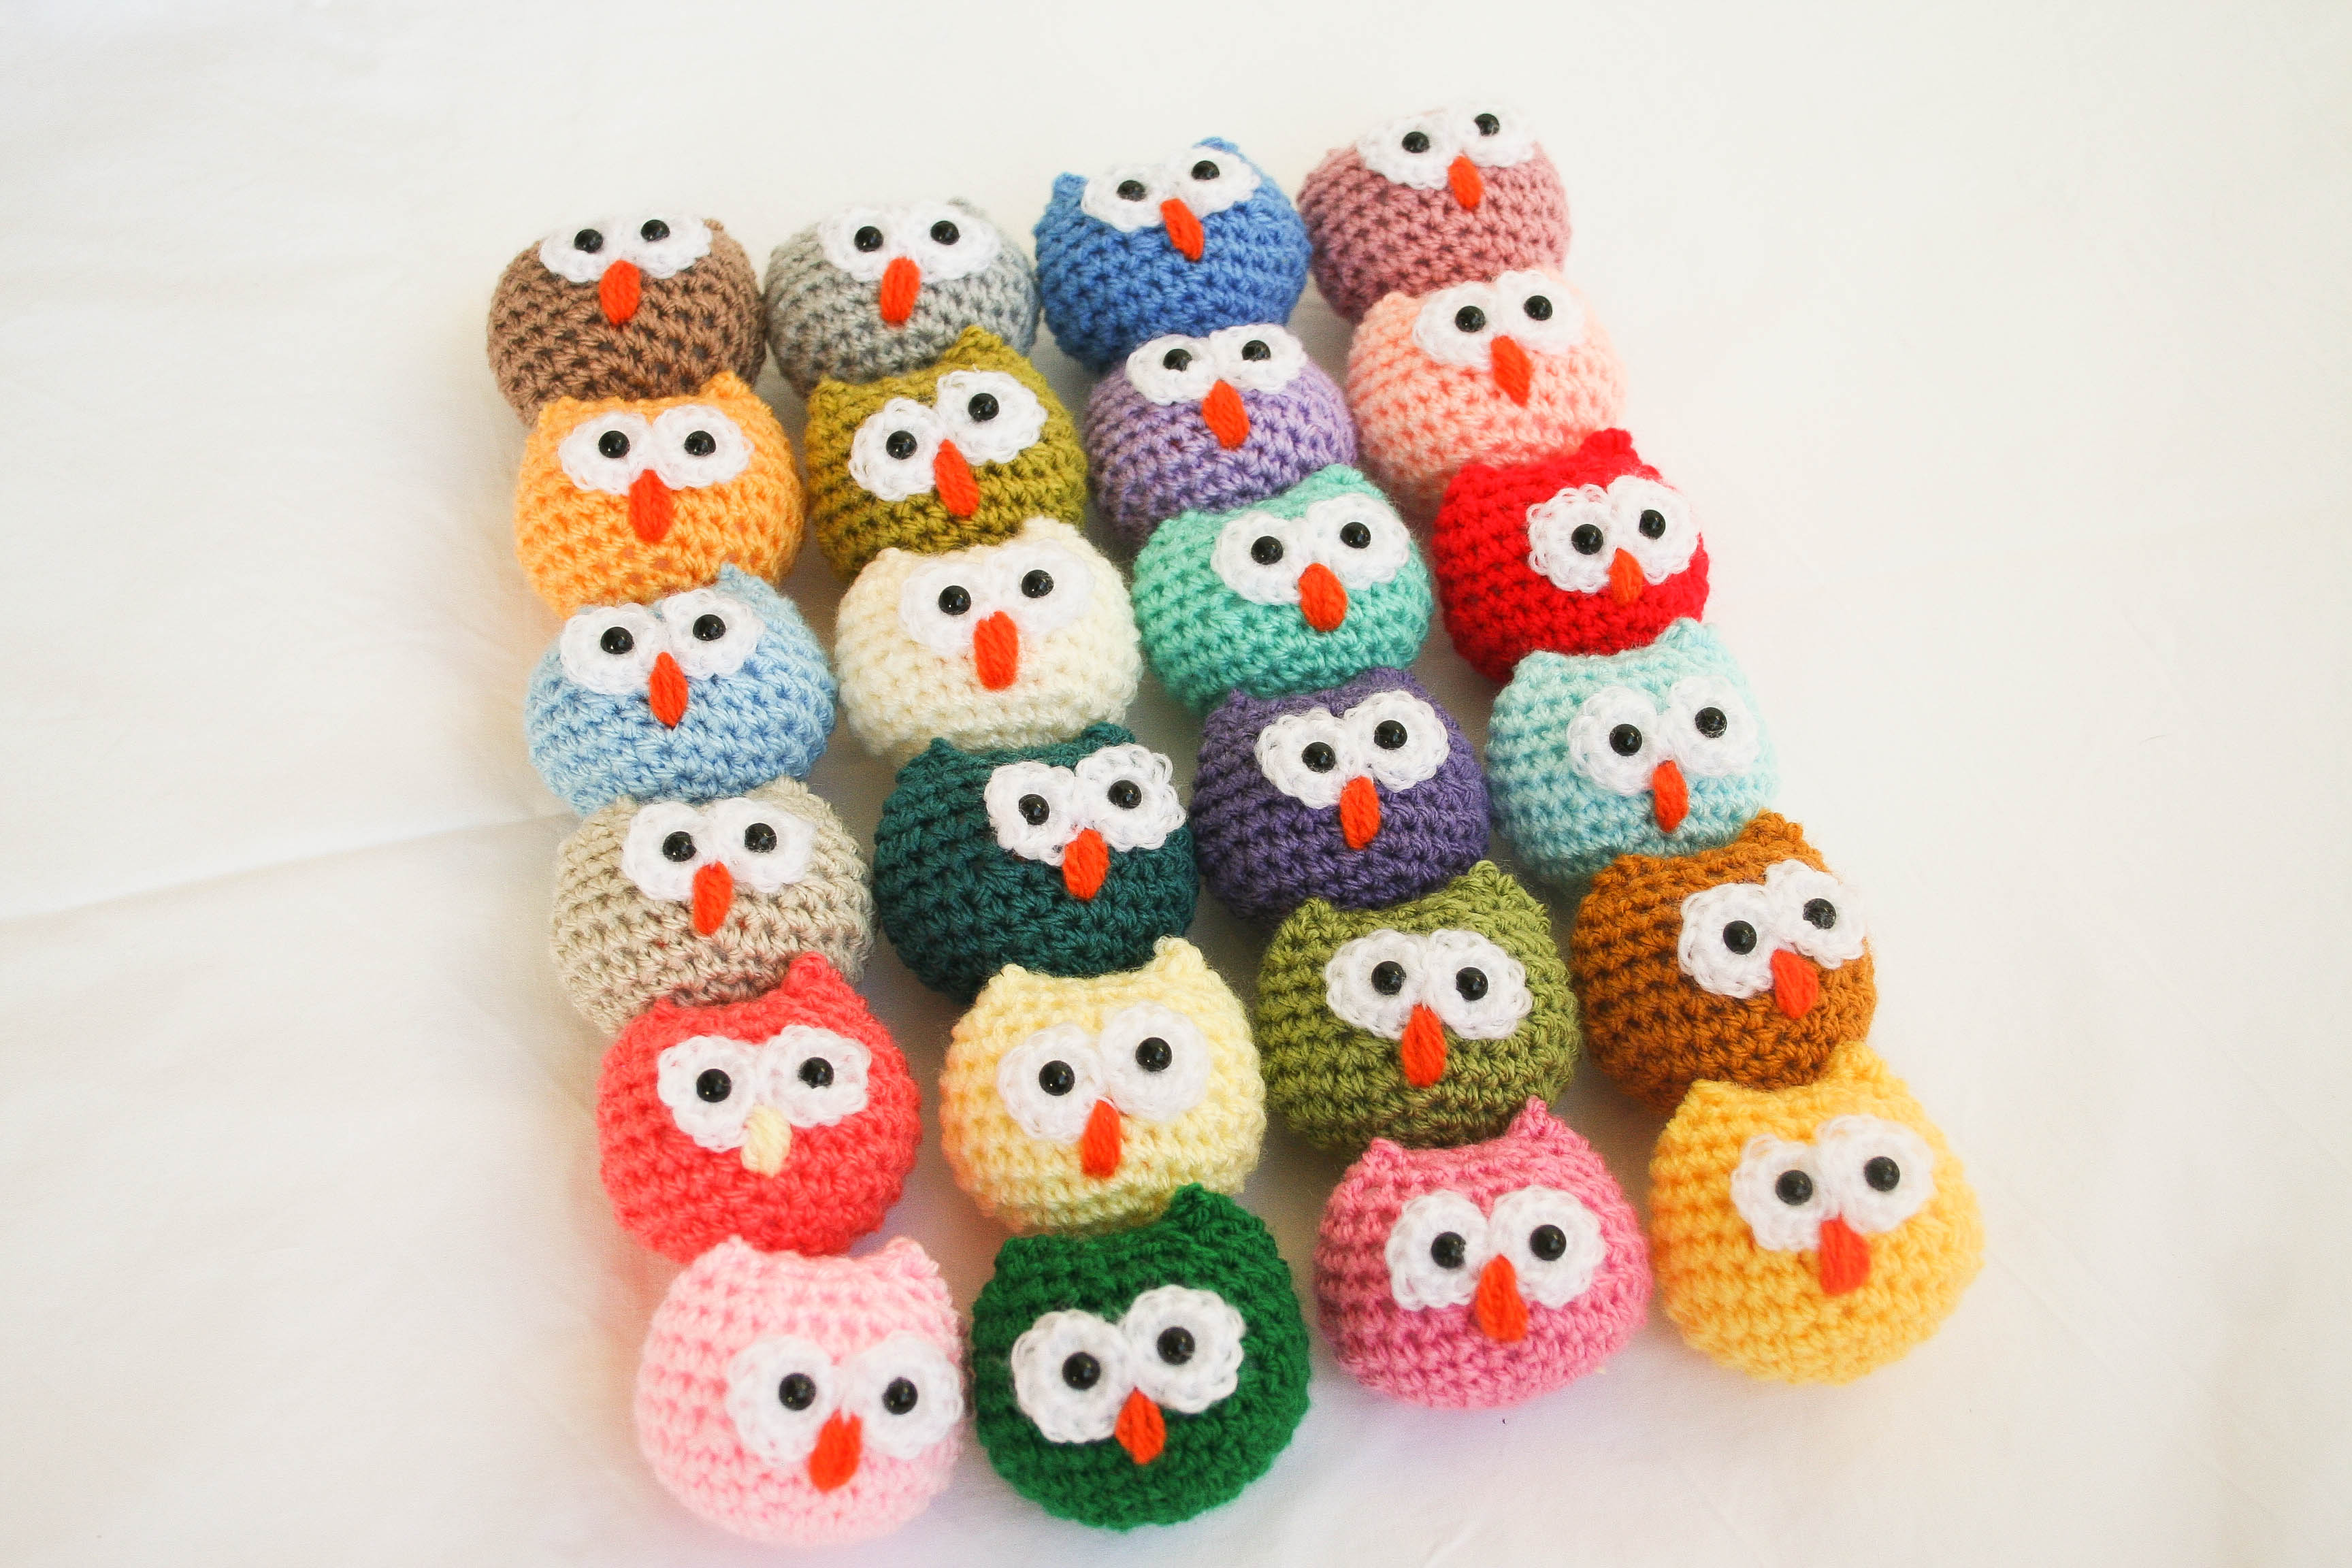 Owl Keychain - All About Ami